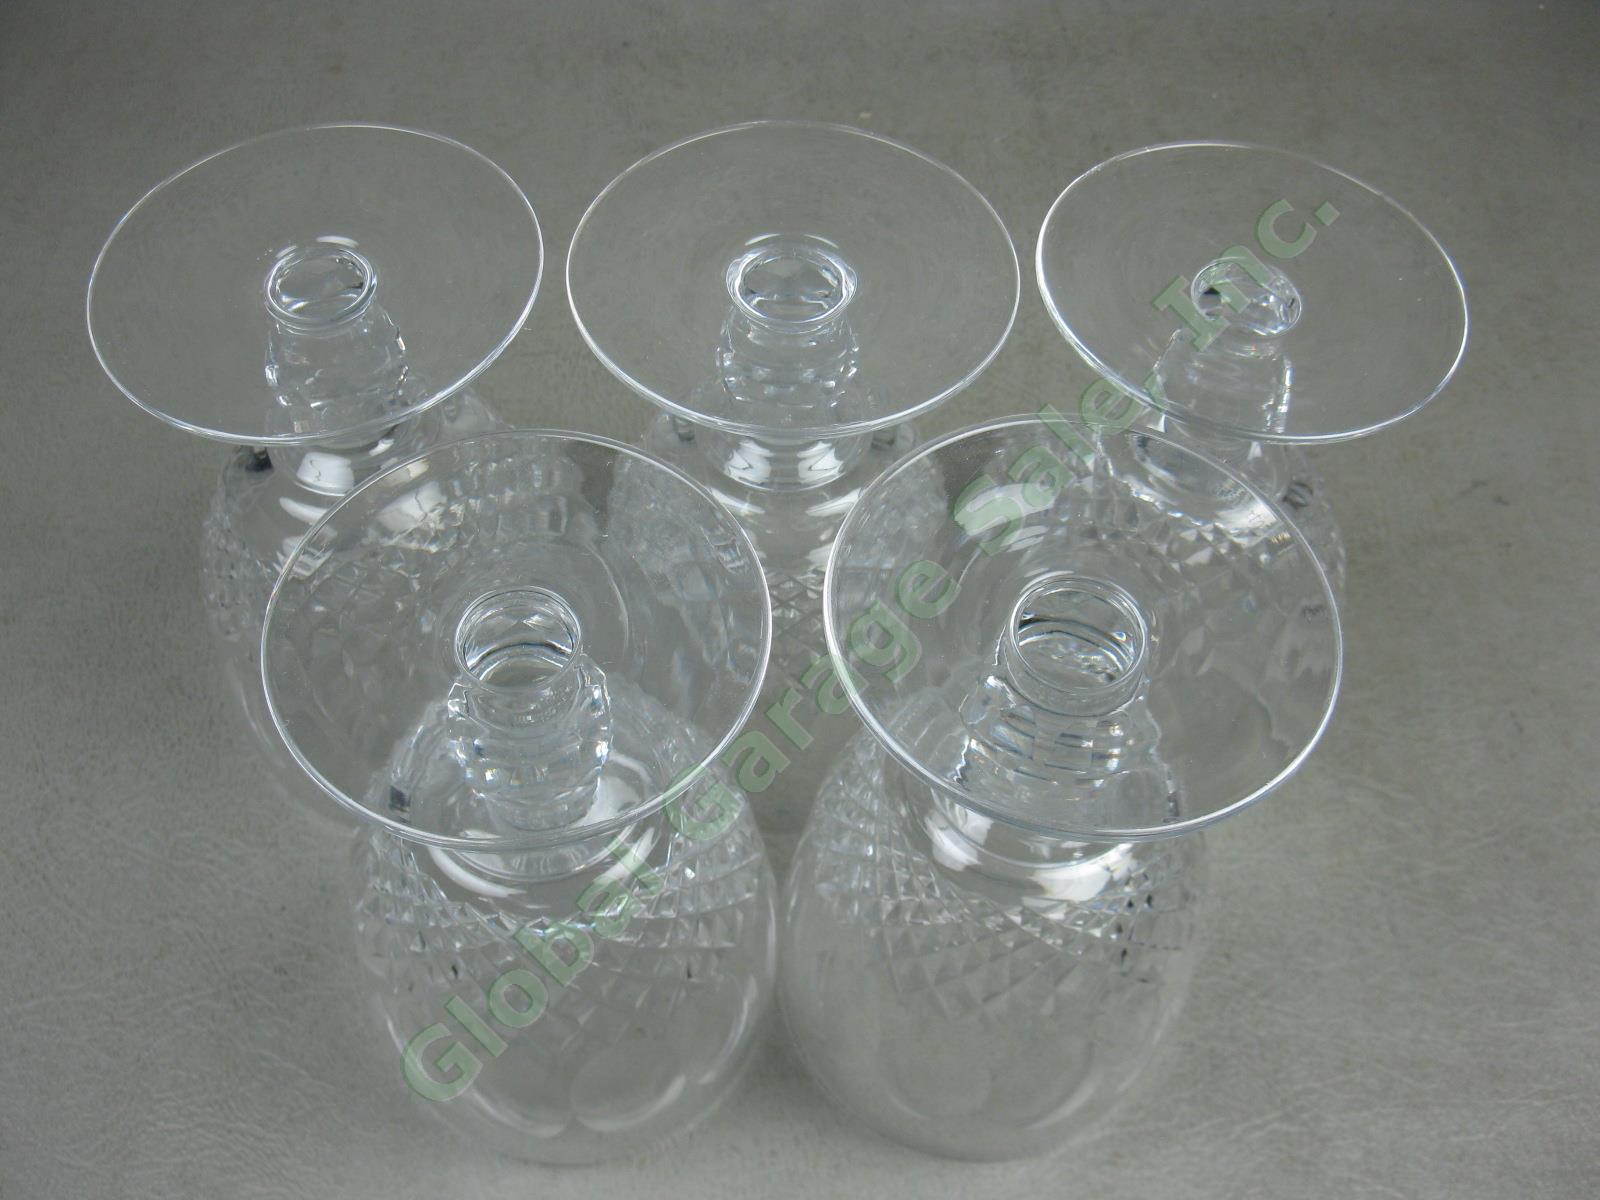 5 Waterford Cut Lead Crystal Colleen Water Goblet Glasses Set Lot 5-1/4" Tall NR 2